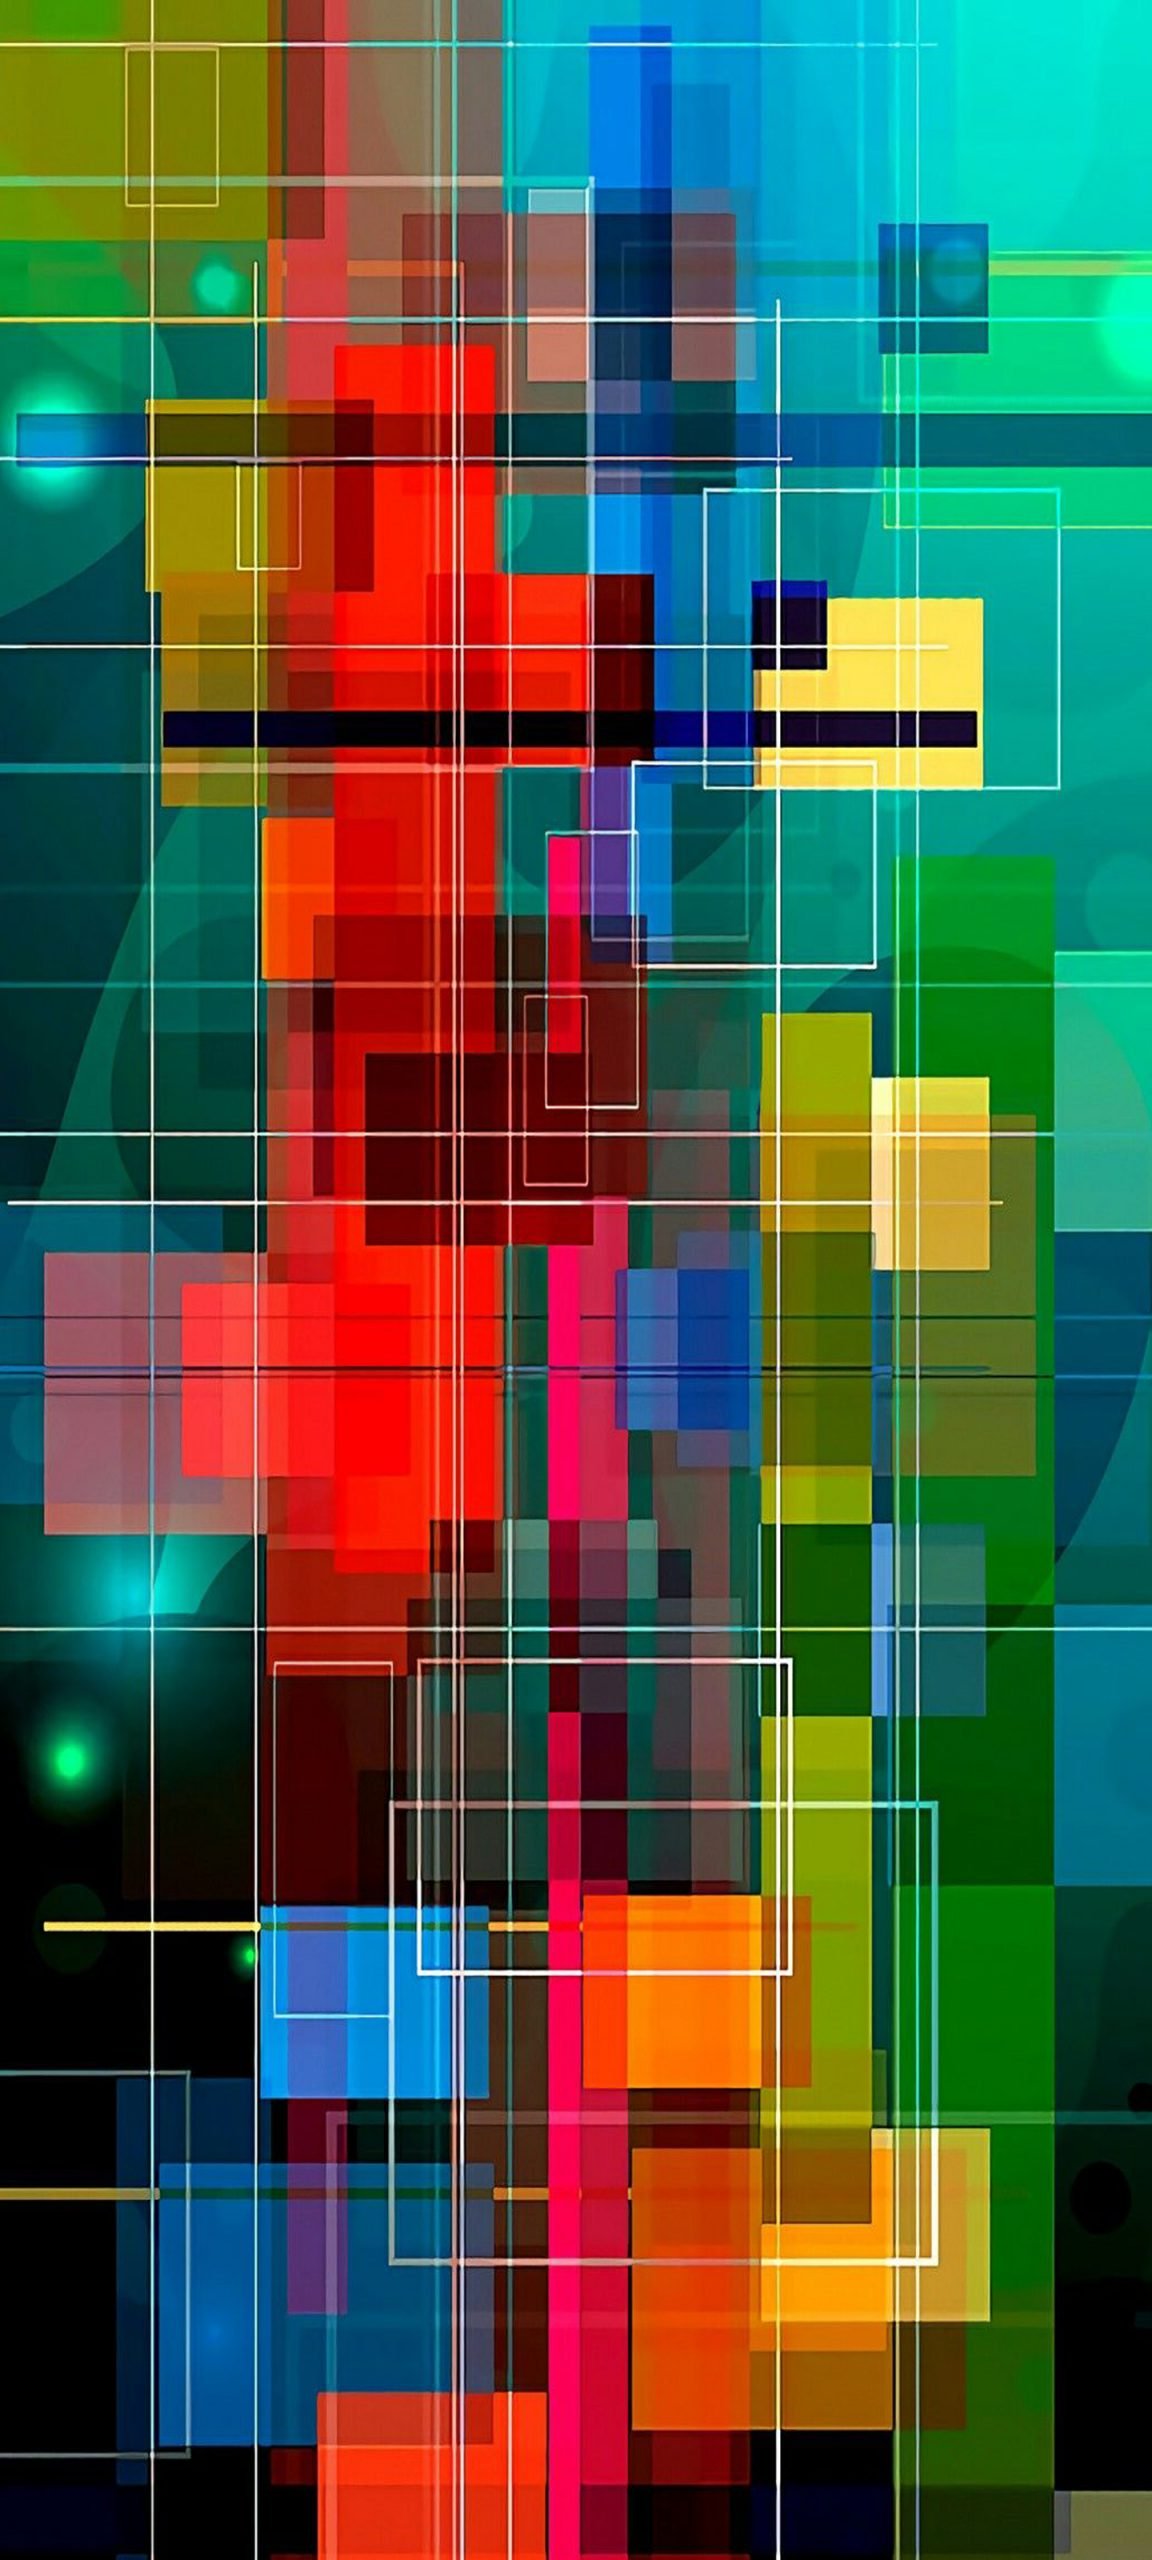 Wallpaper That Will Look Perfect on Your Samsung Galaxy S20 - Colorful Squares Wallpaper. Wallpaper Download. High Resolution Wallpaper